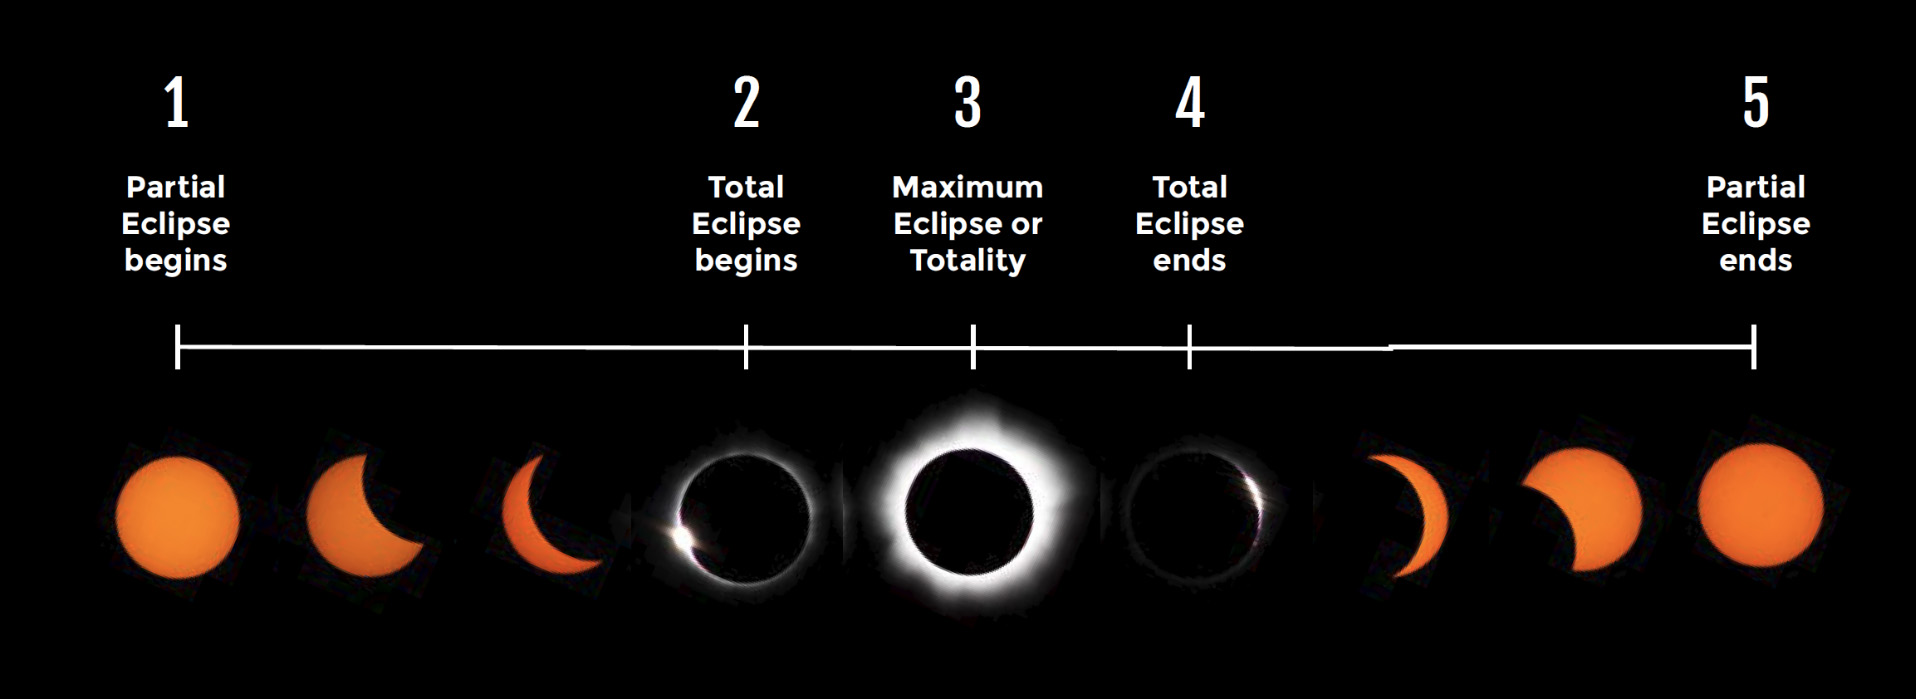 5 Stages of a Total Eclipse - Solar Eclipse Guide